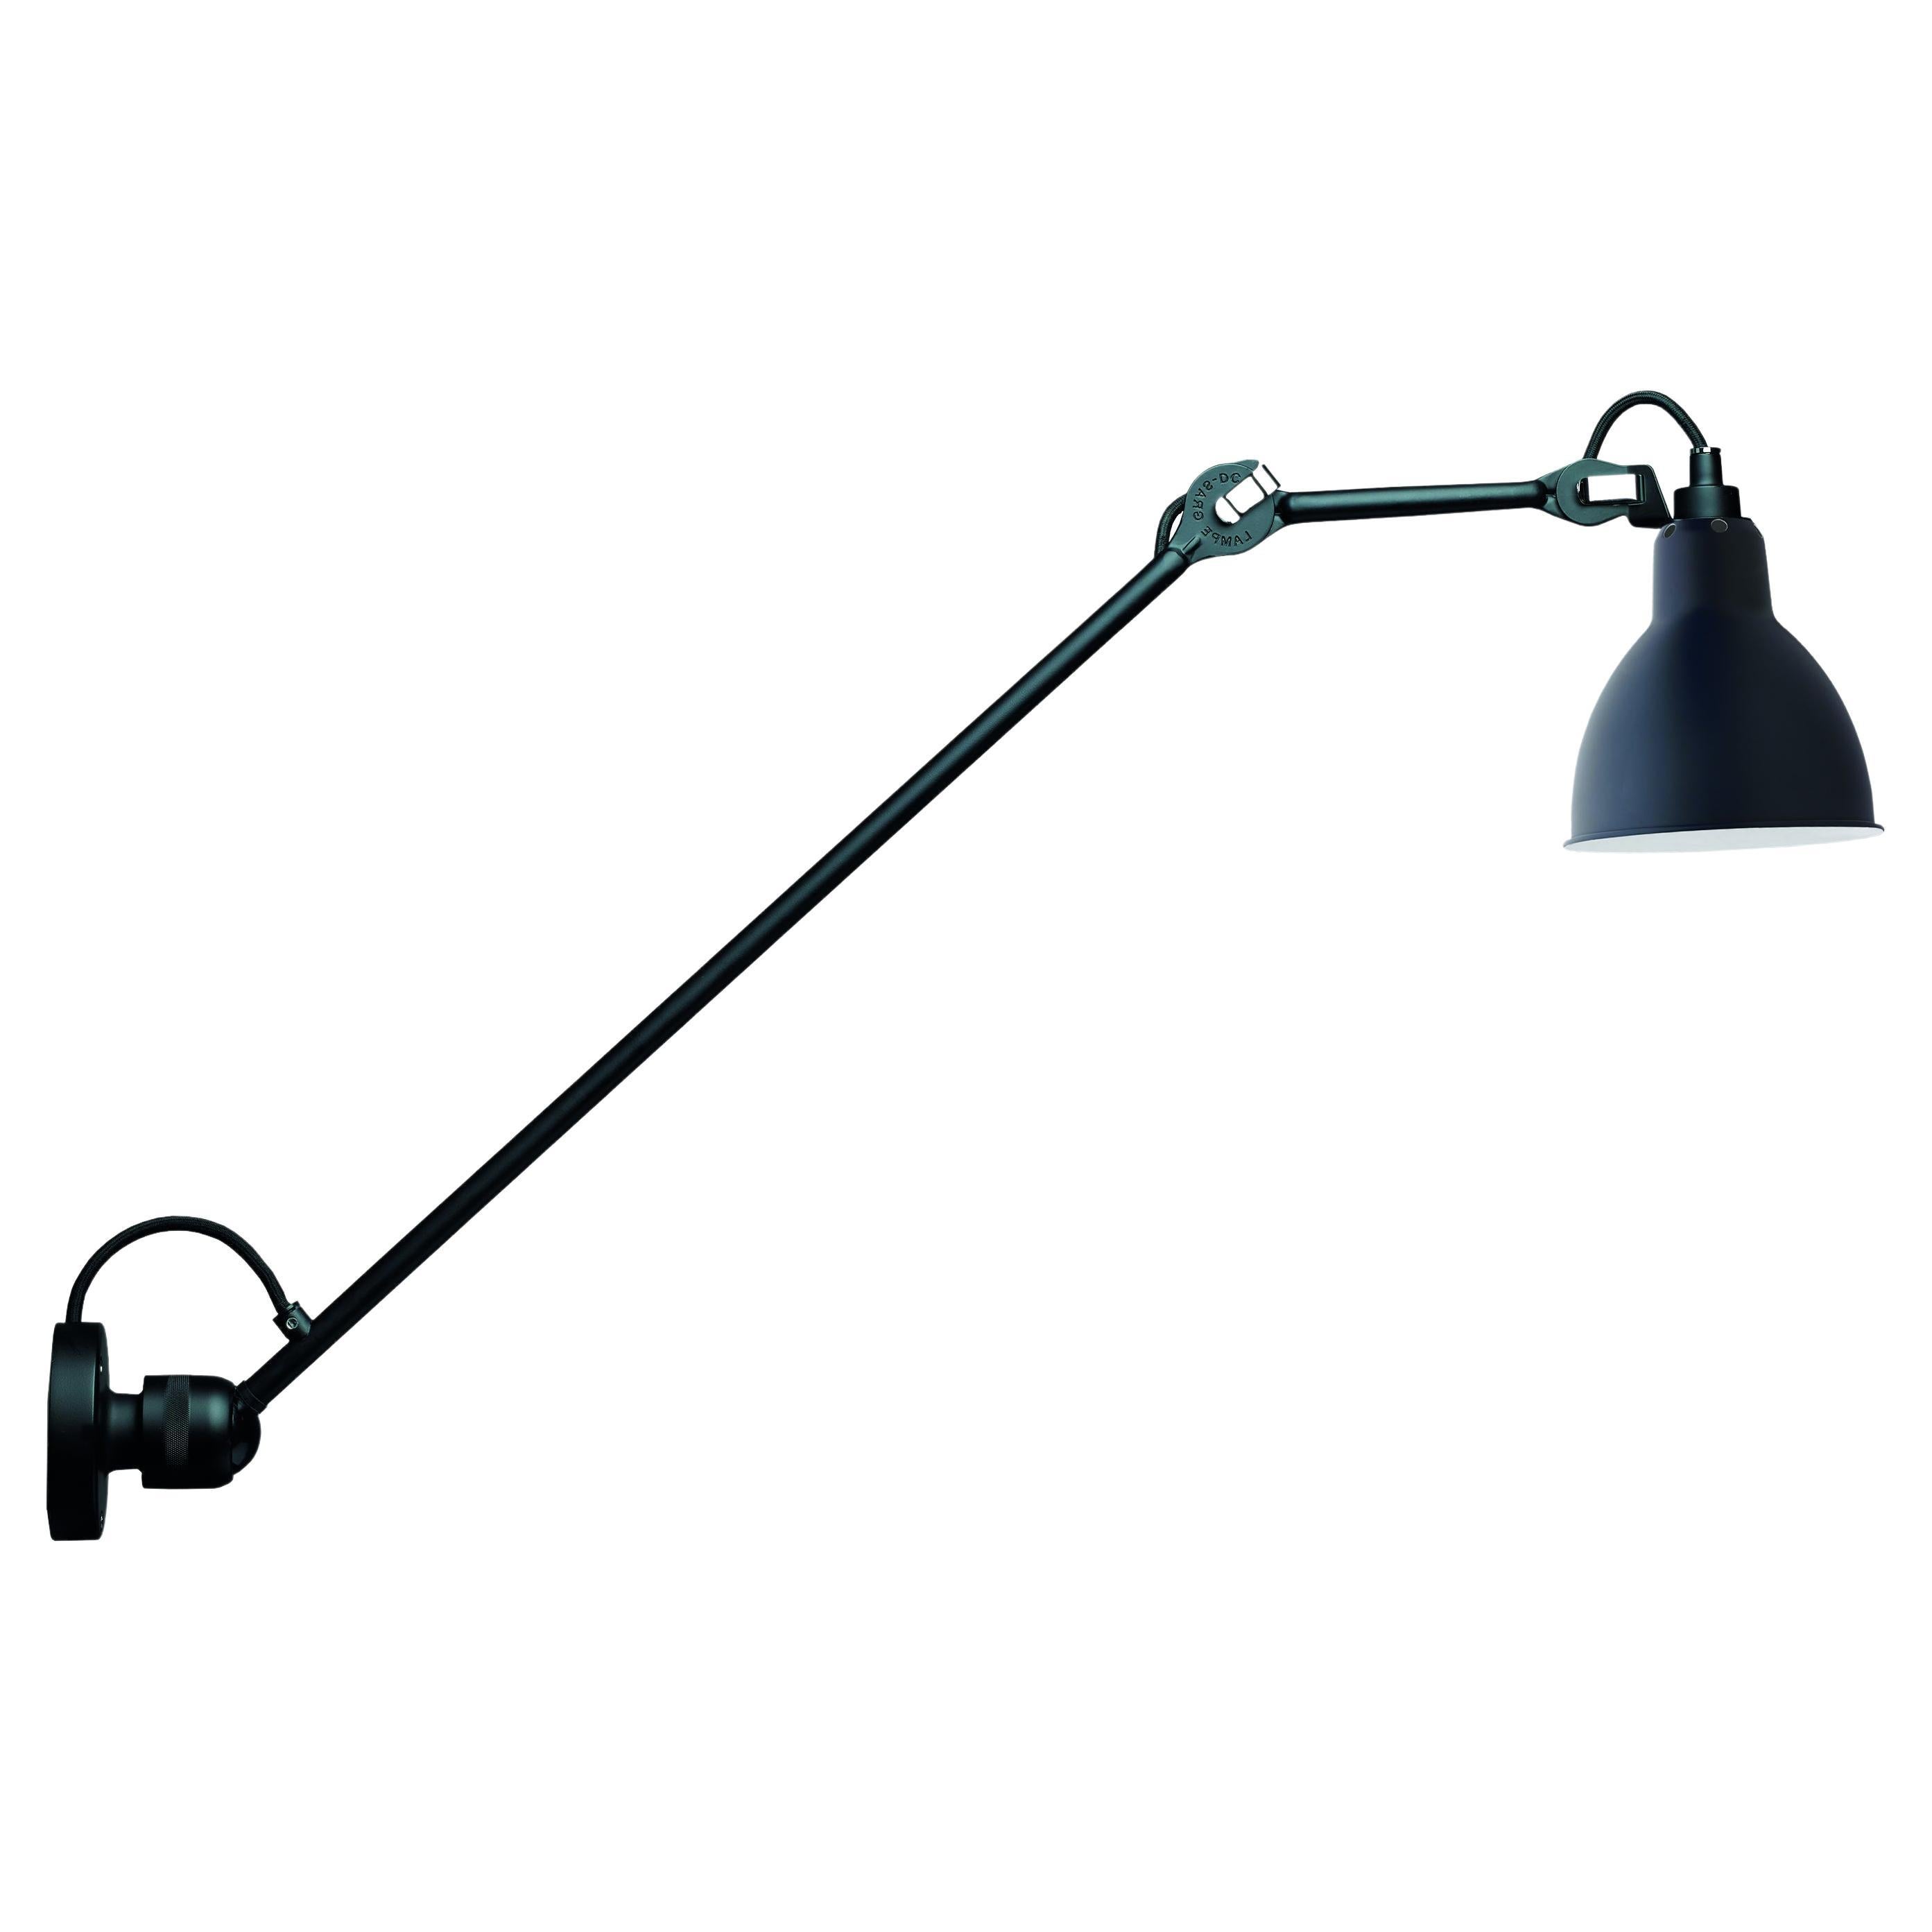 DCW Editions La Lampe Gras N°304 L60 Wall Lamp in Black Arm and Blue Shade